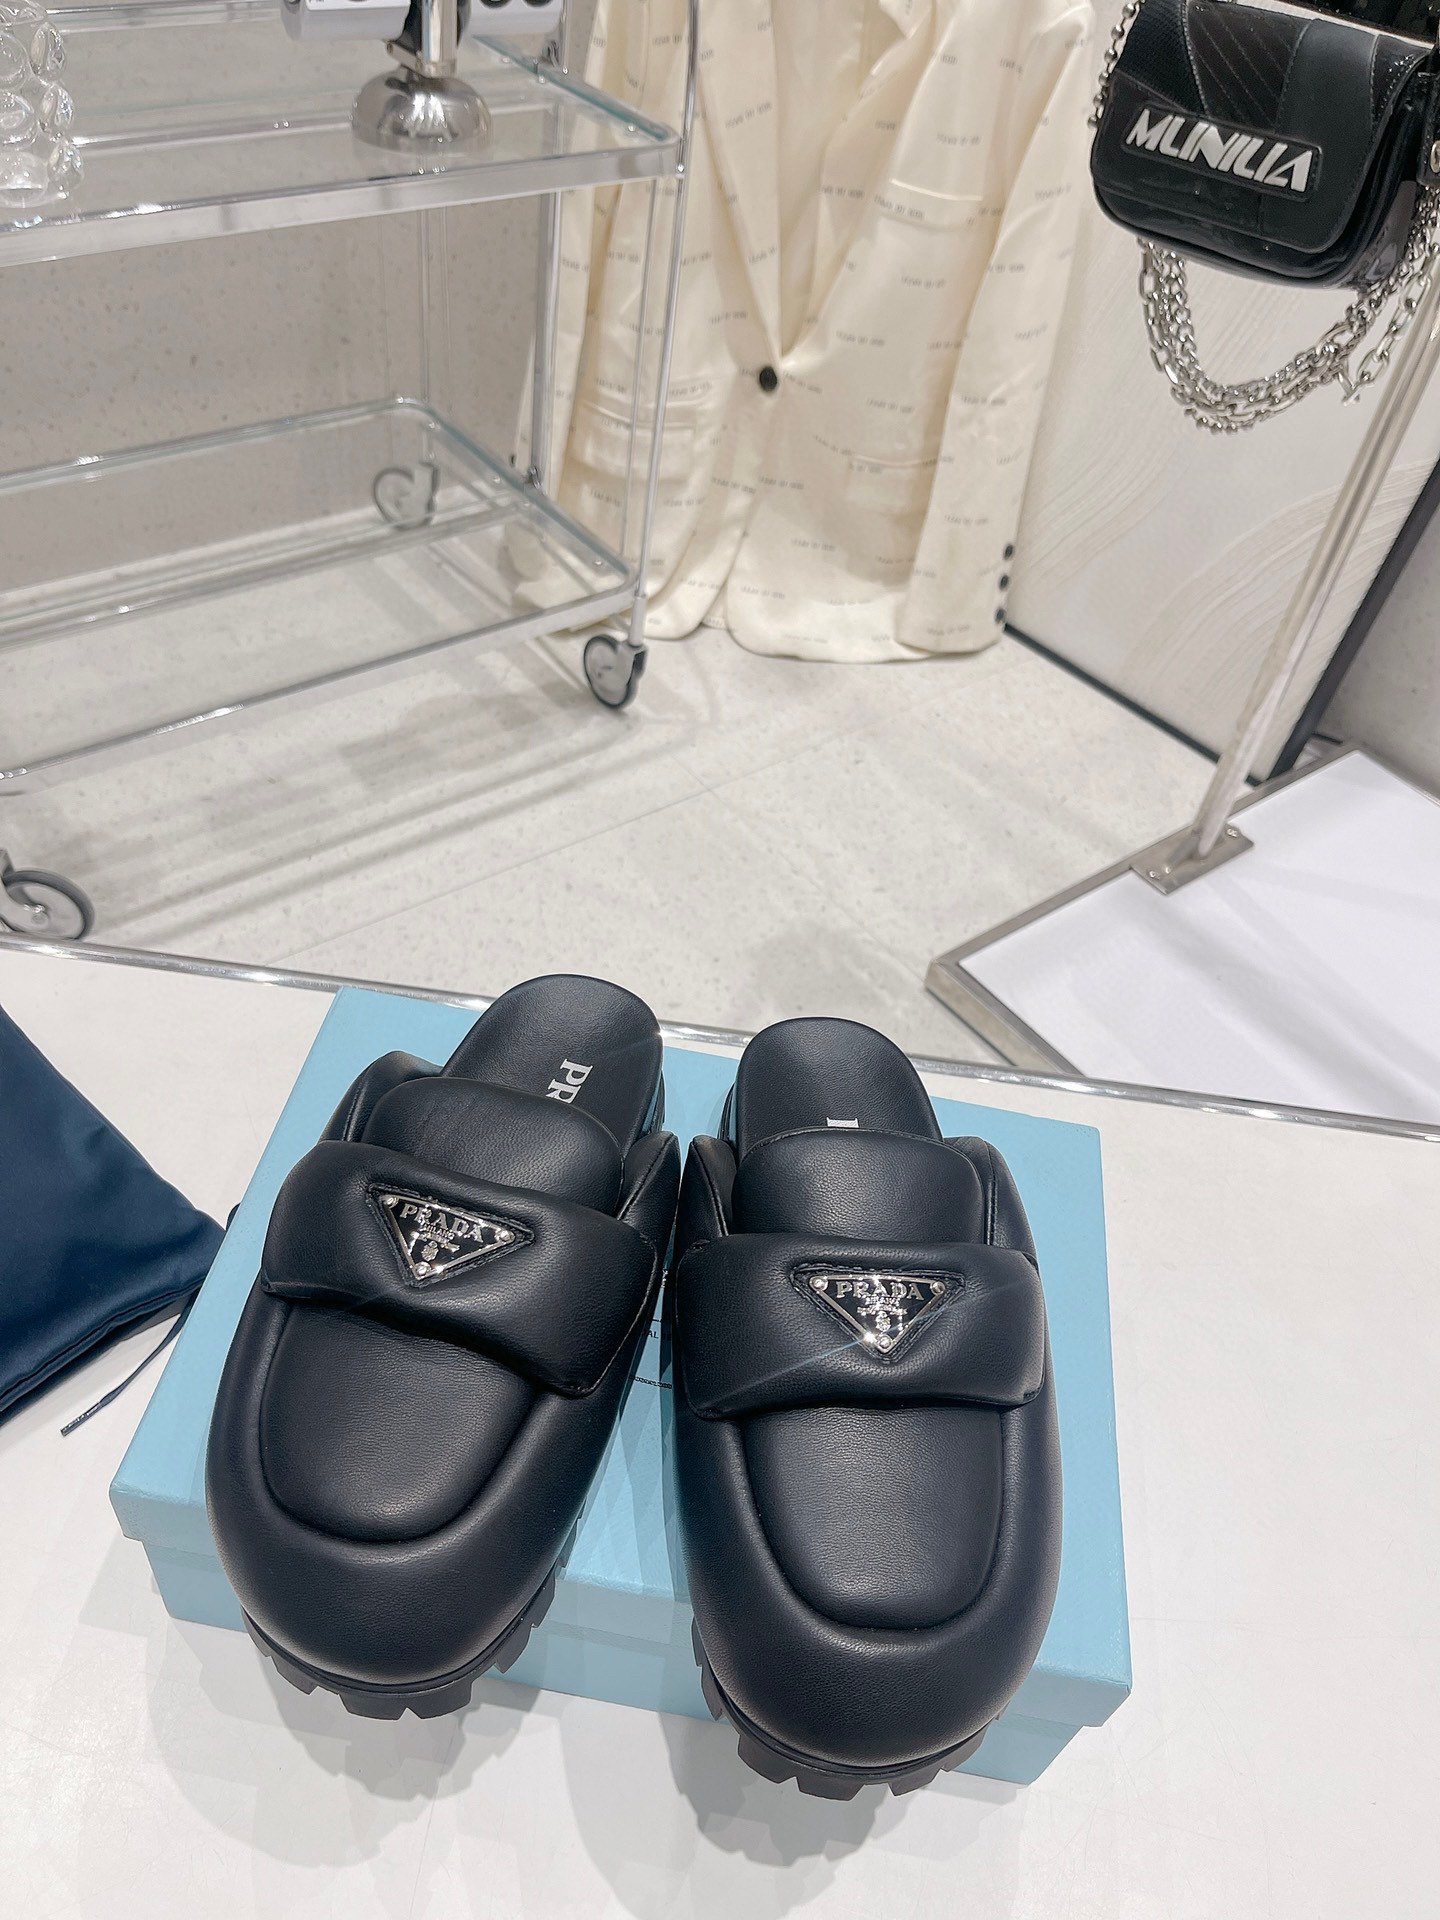 Prada Shoes Mules Rubber Sheepskin Spring/Summer Collection